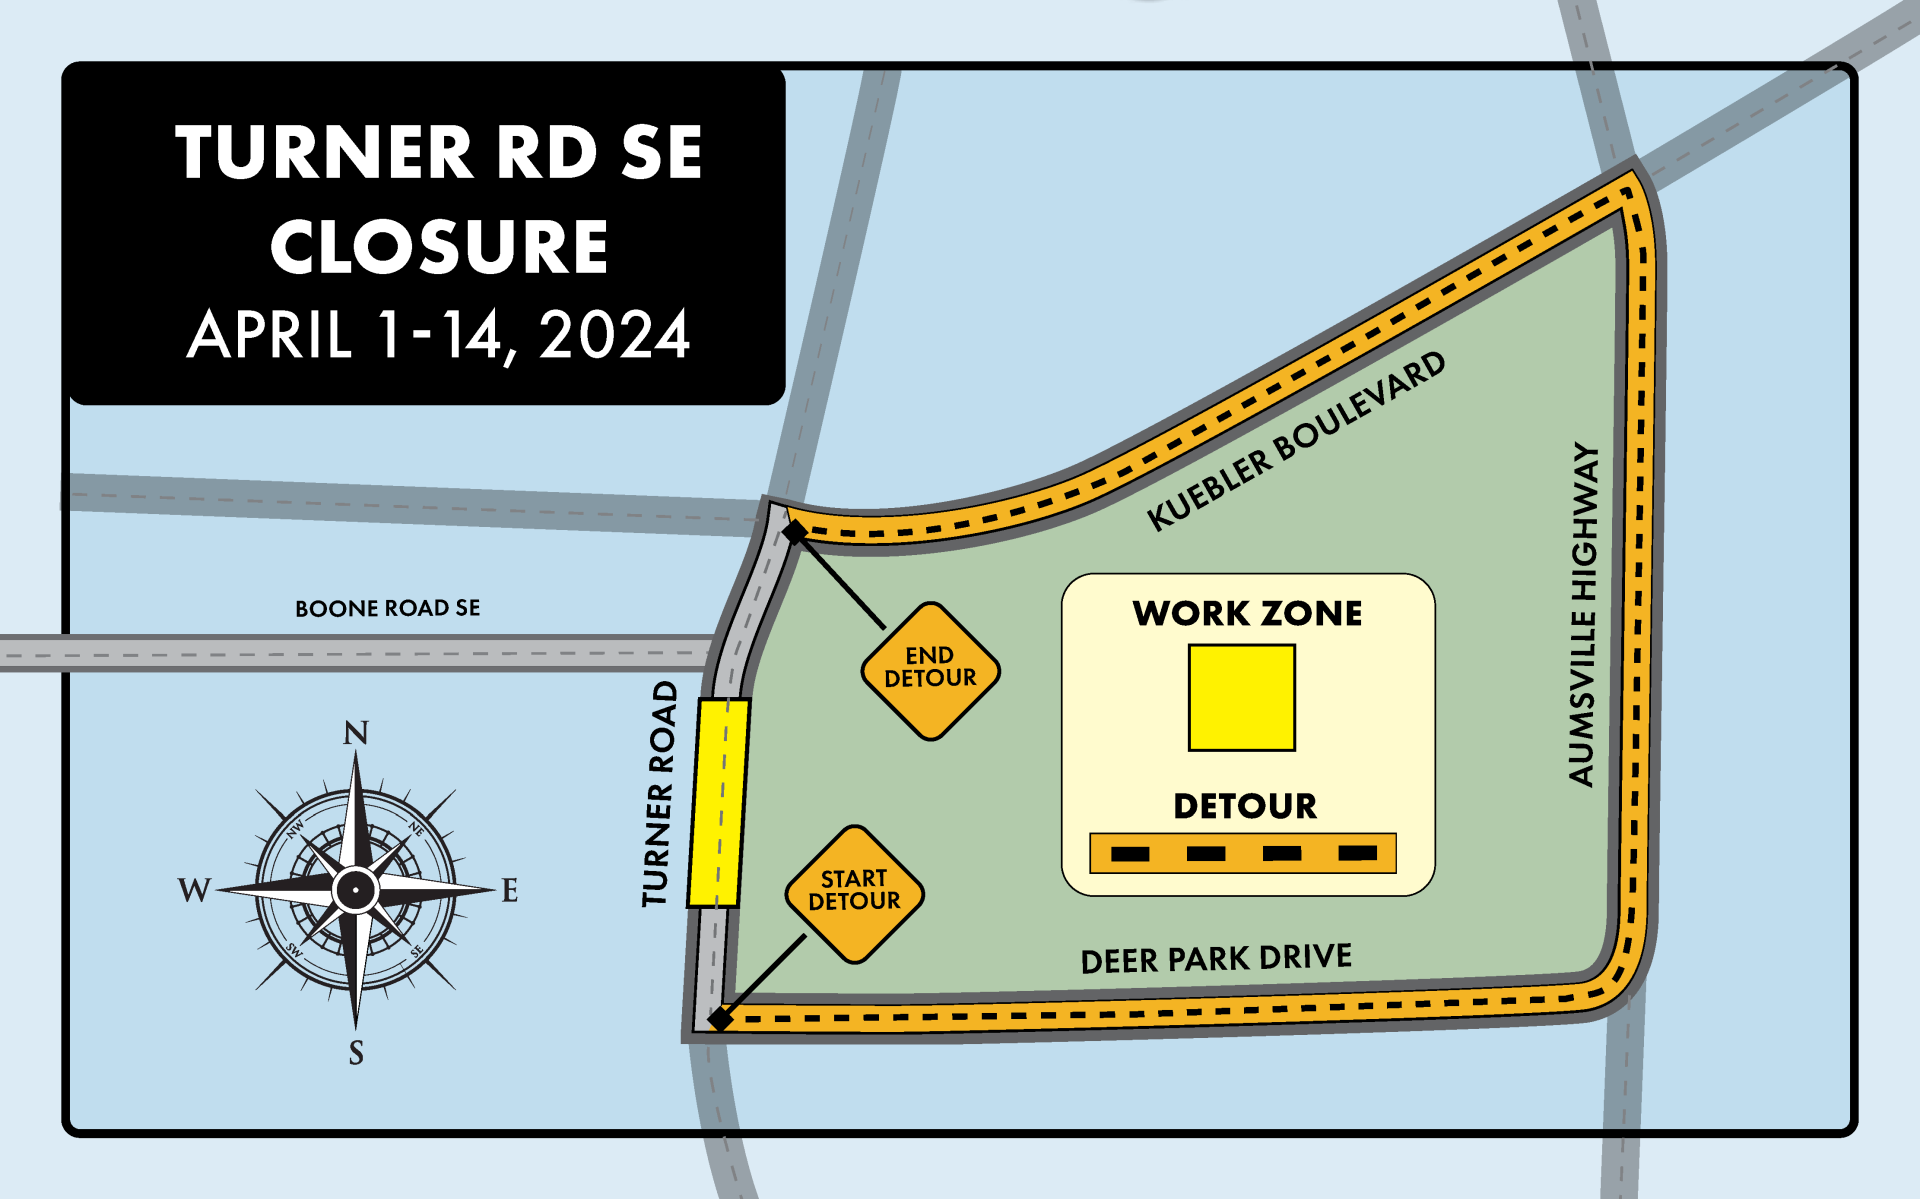 Map showing Turner Rd SE closure just south of Boone Rd S